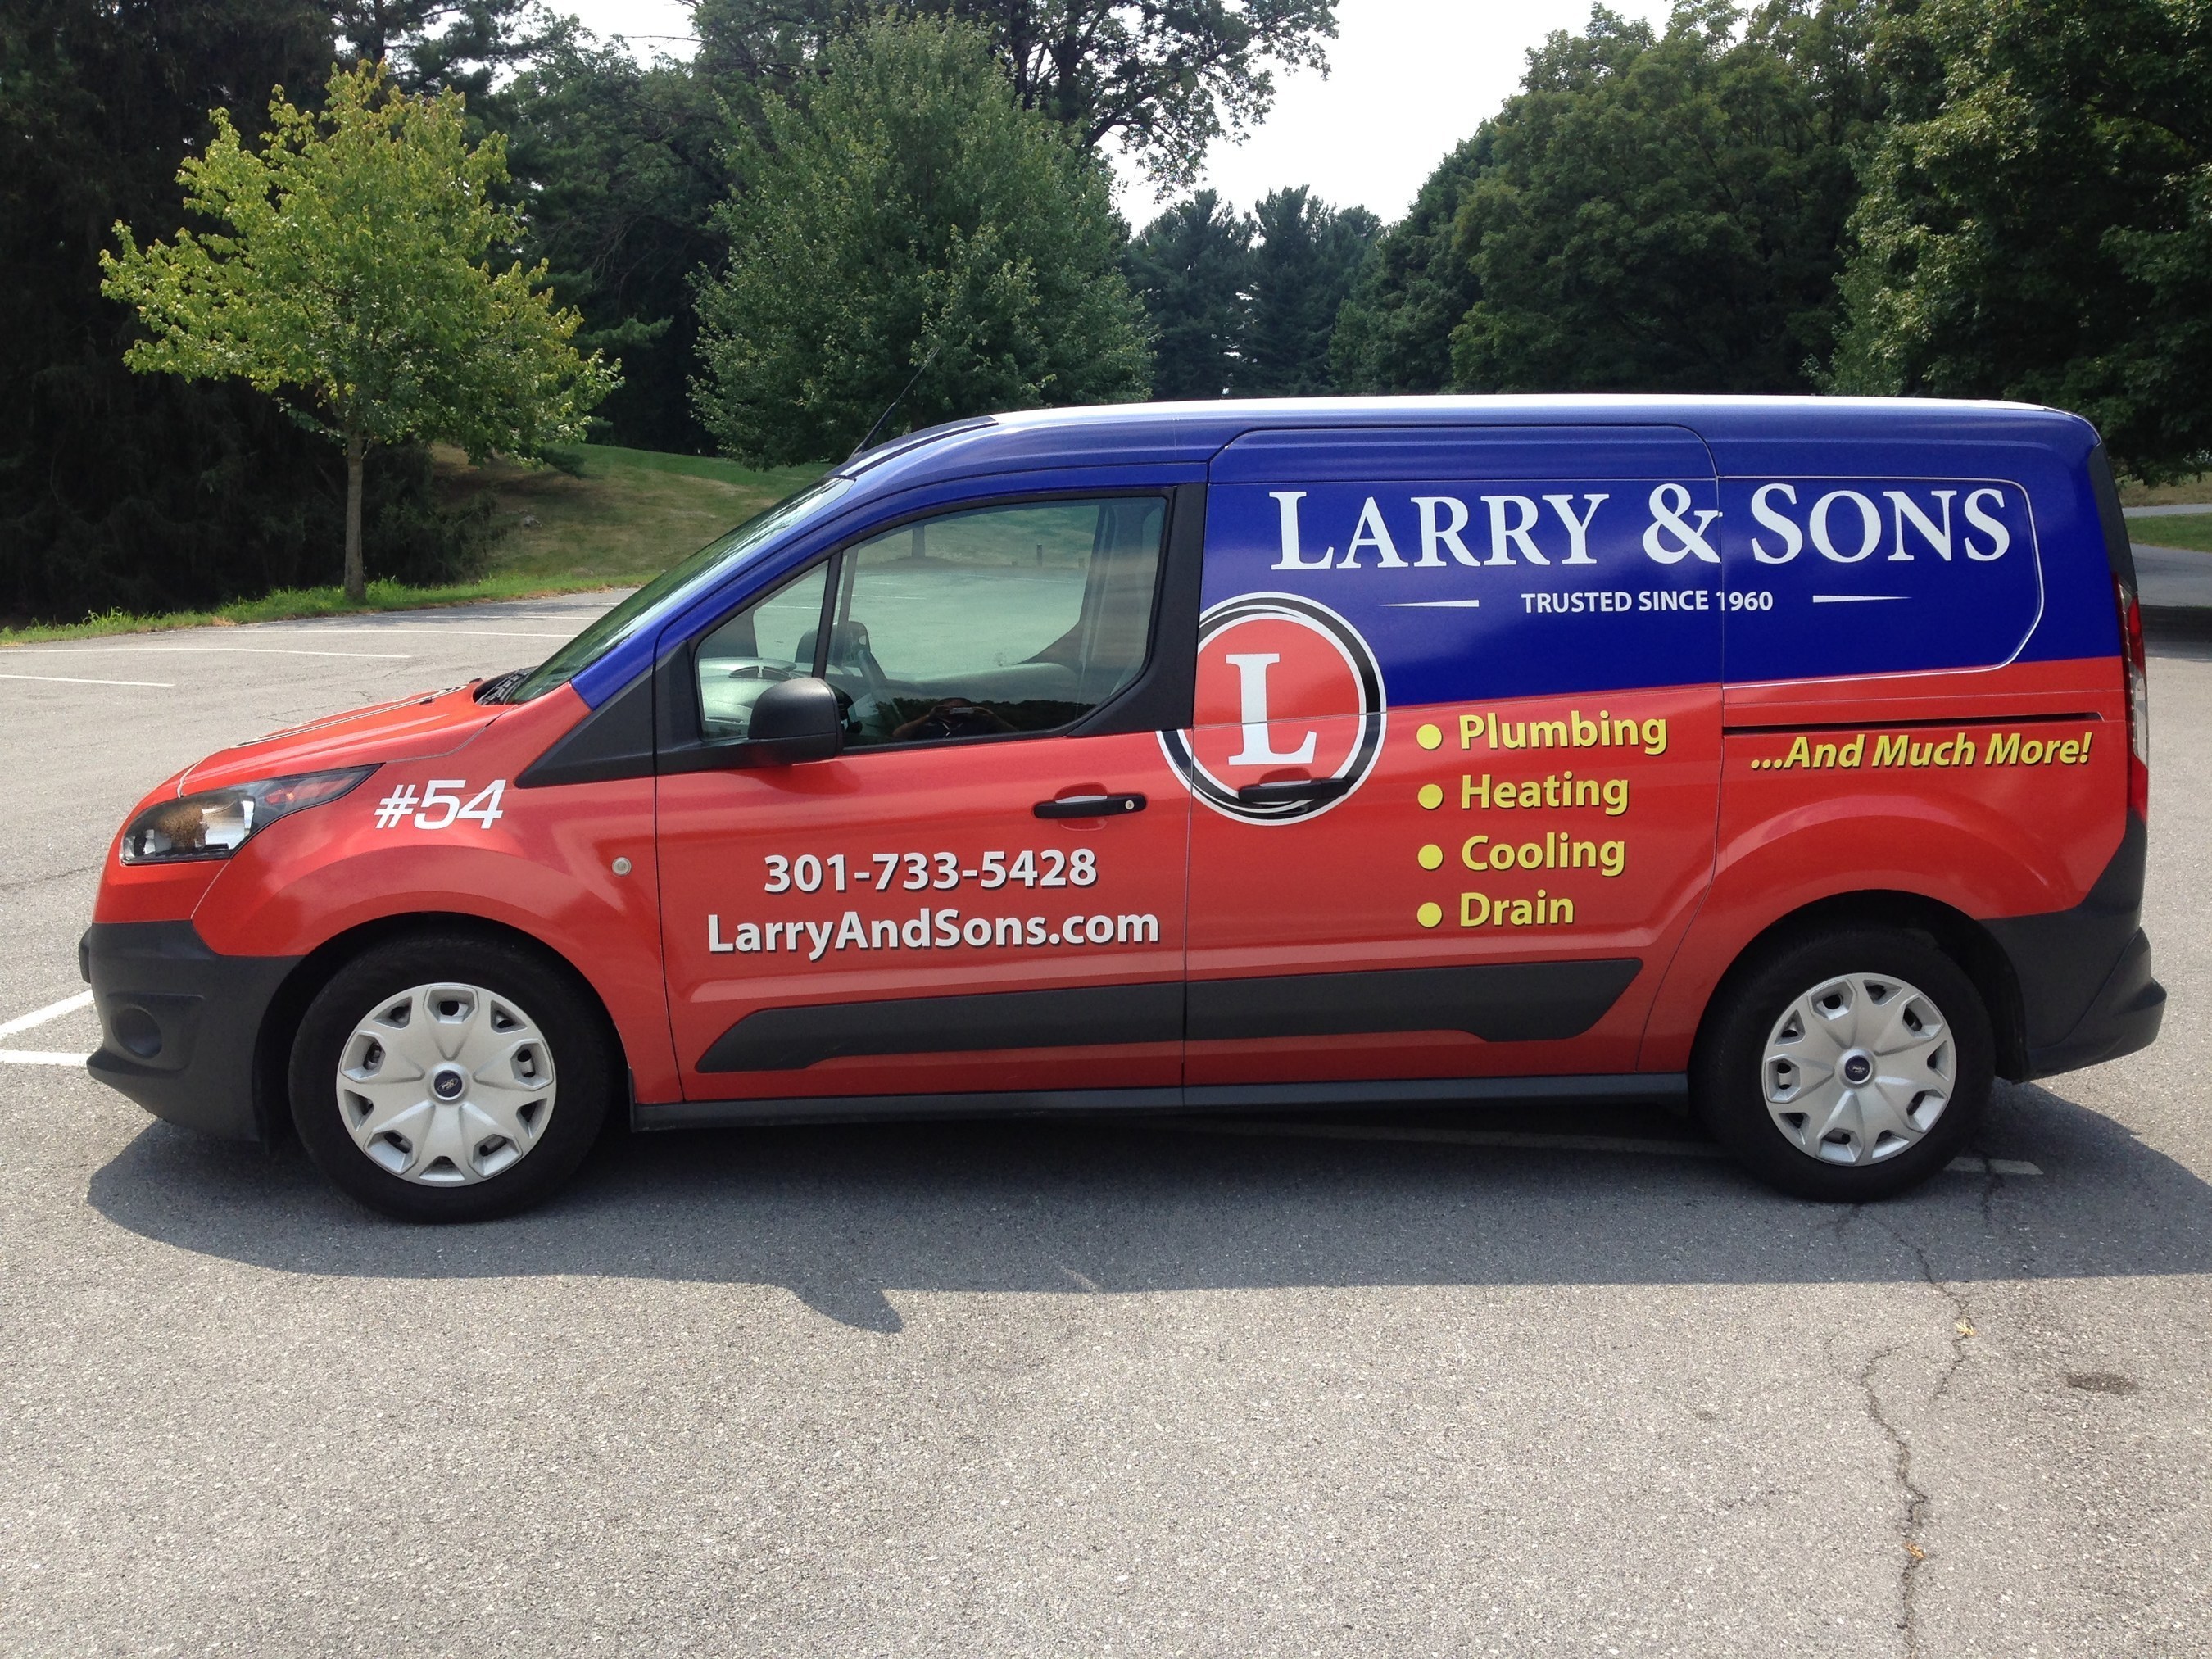 Larry & Sons - Waterproofing Your Home